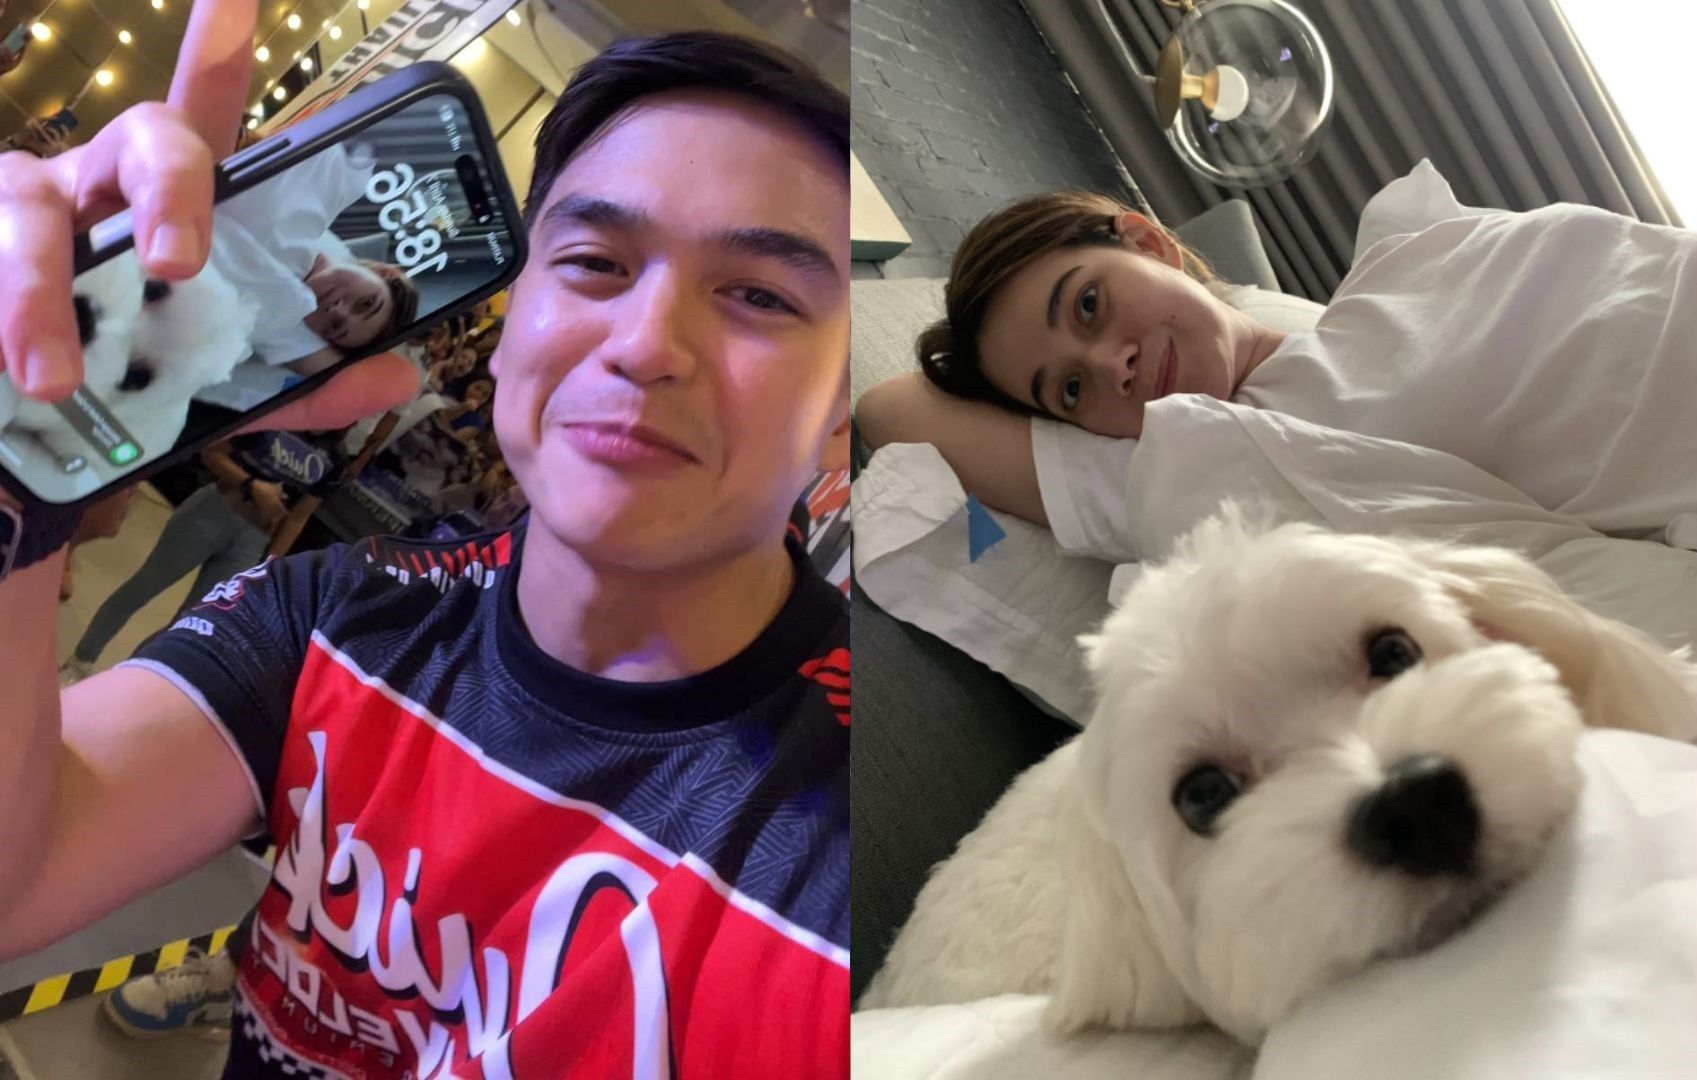 Bea Alonzo still Dominic Roque's phone wallpaper 2 months after wedding called off